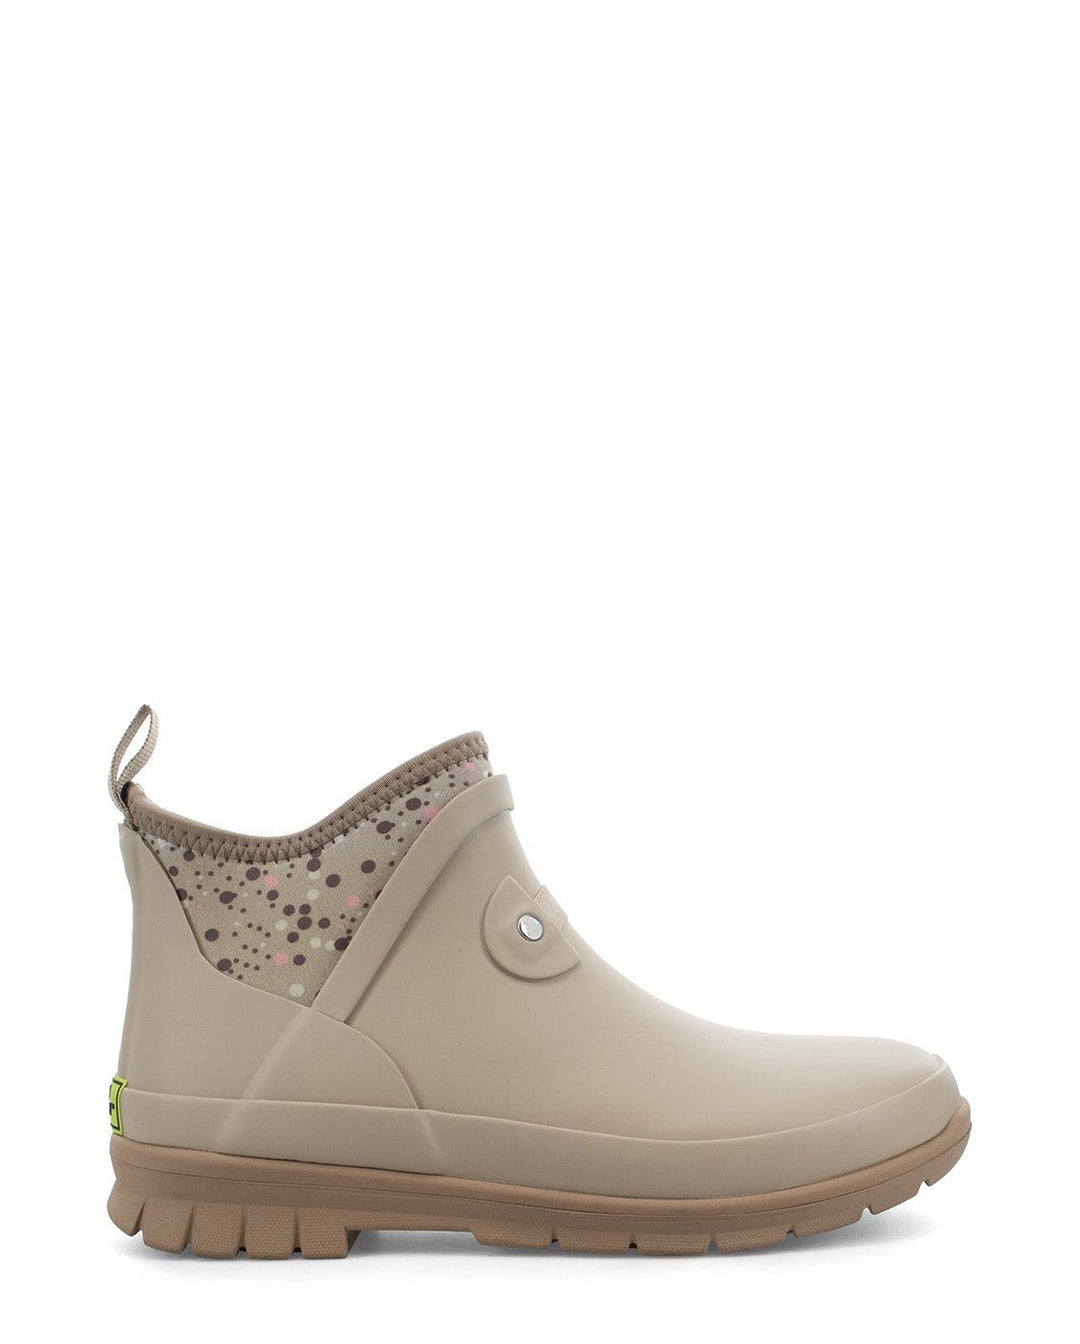 New! Women's Instorm Neoprene Ankle Rain Boot- Taupe - Western Chief